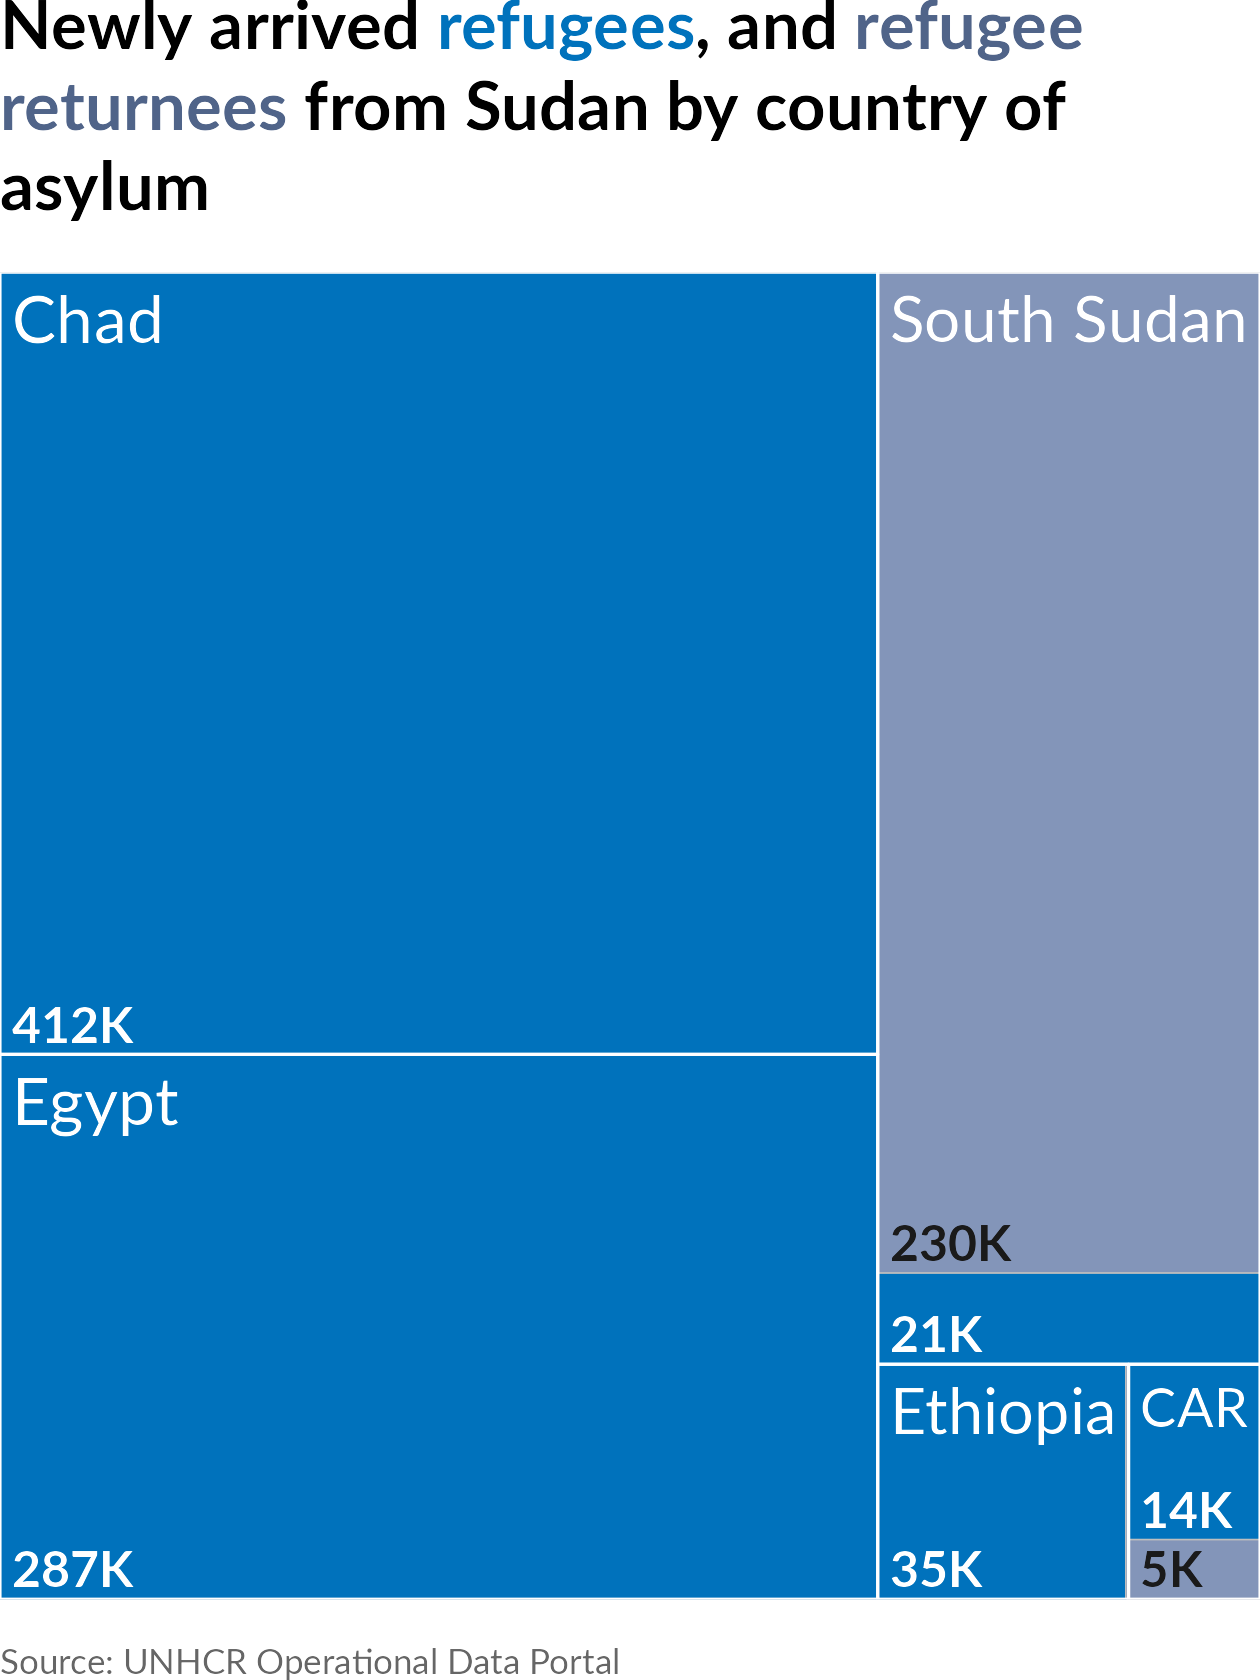 Treemap showing the proportion of refugees and refugee returnees in the Central African Republic, Chad, Egypt, Ethiopia, and South Sudan